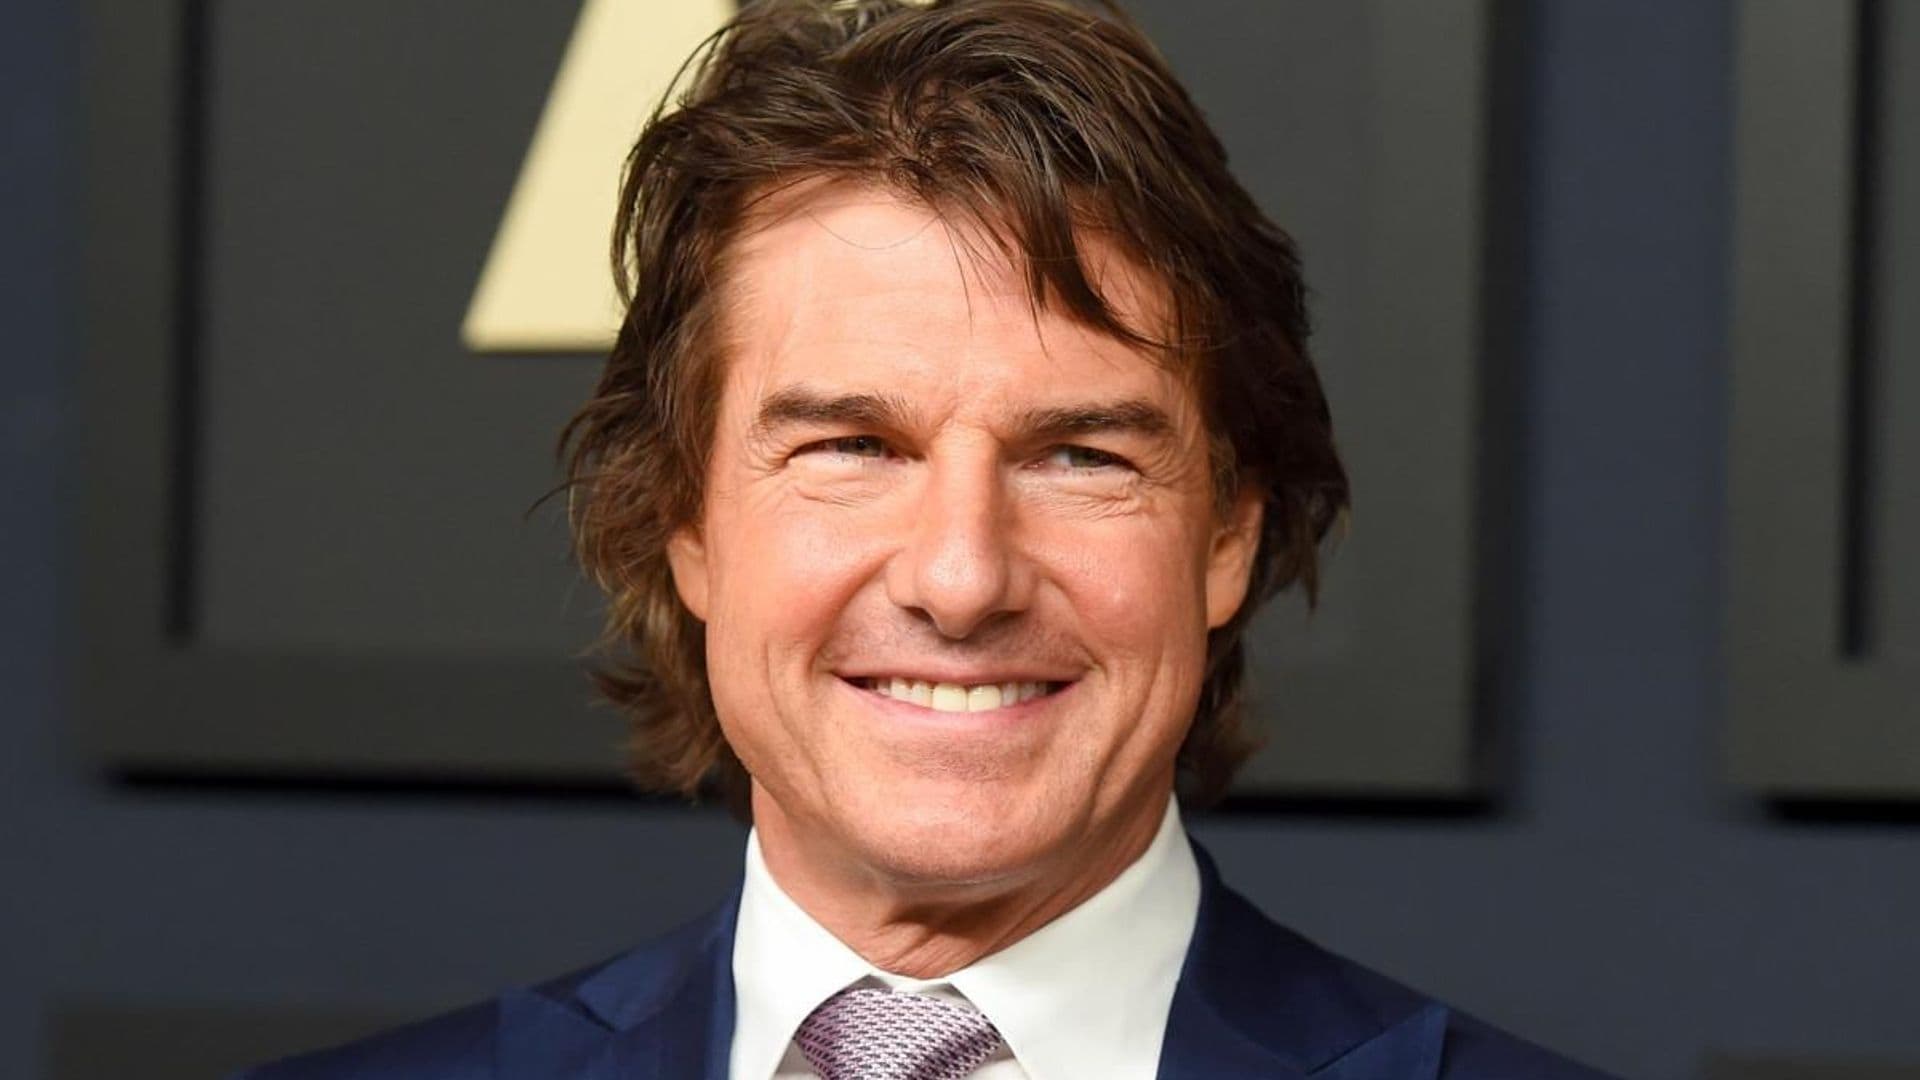 What is Tom Cruise's role at coronation event?